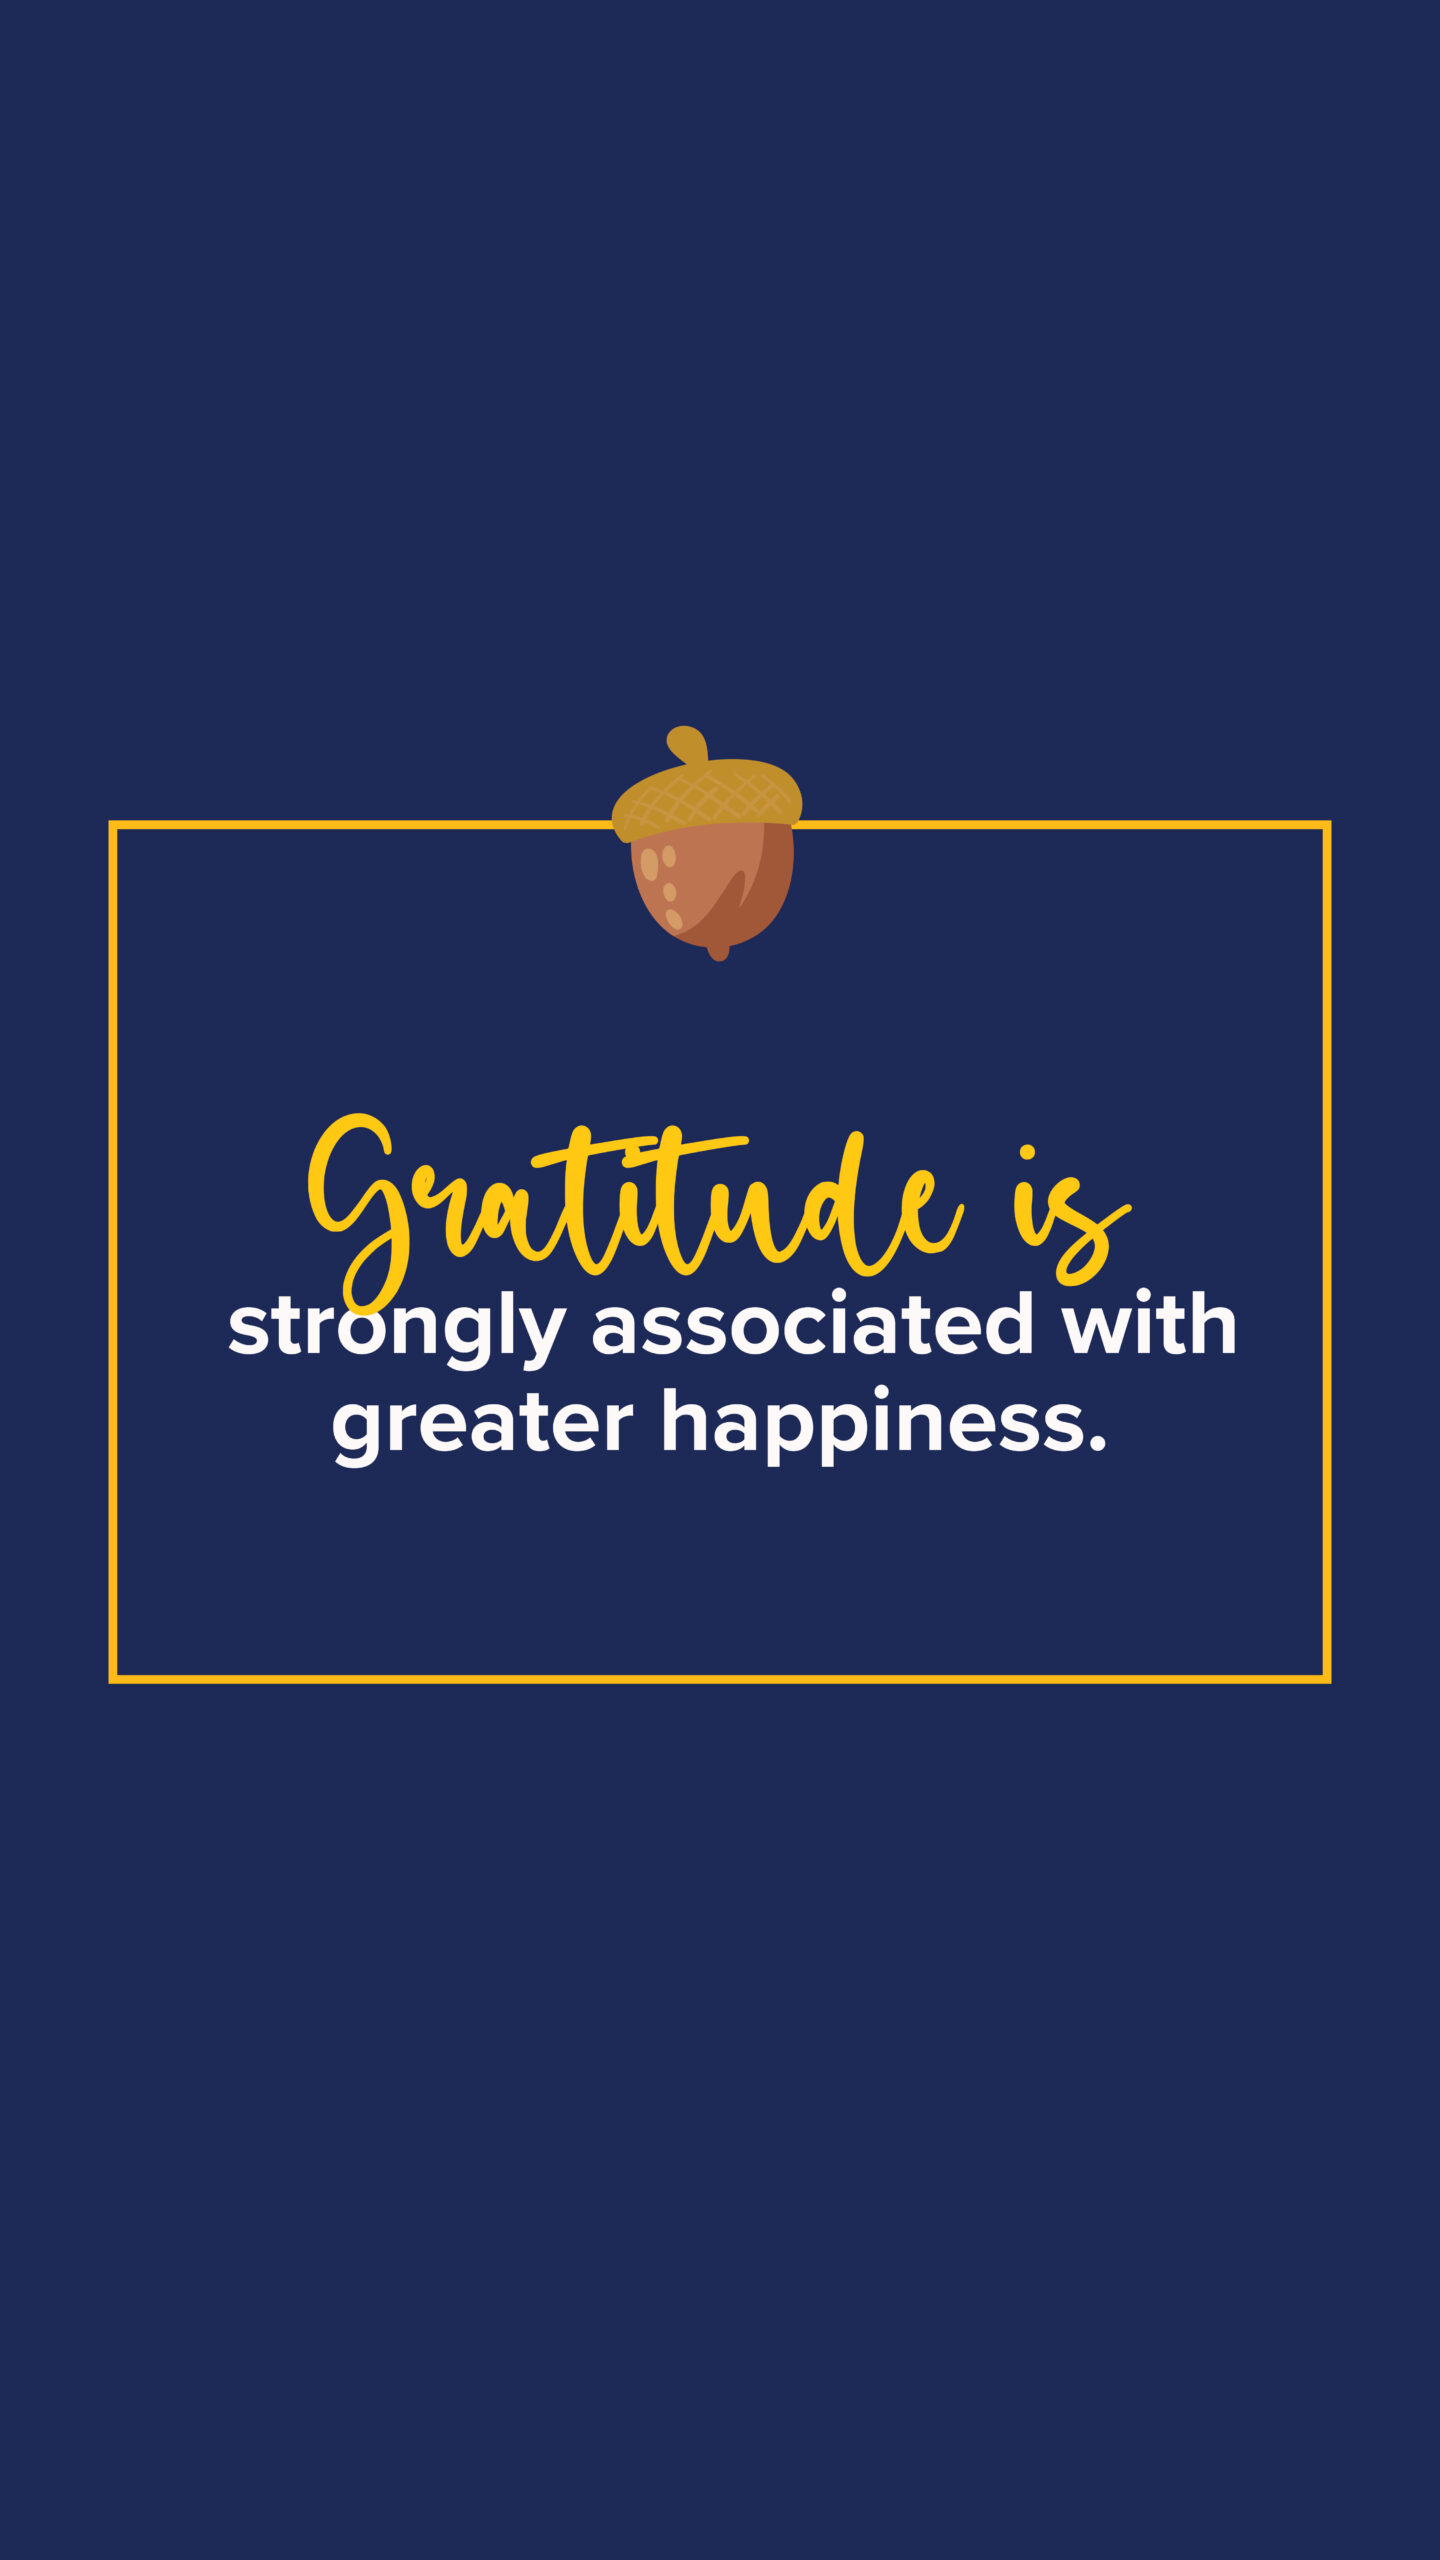 Gertitude is greater happiness. graphics